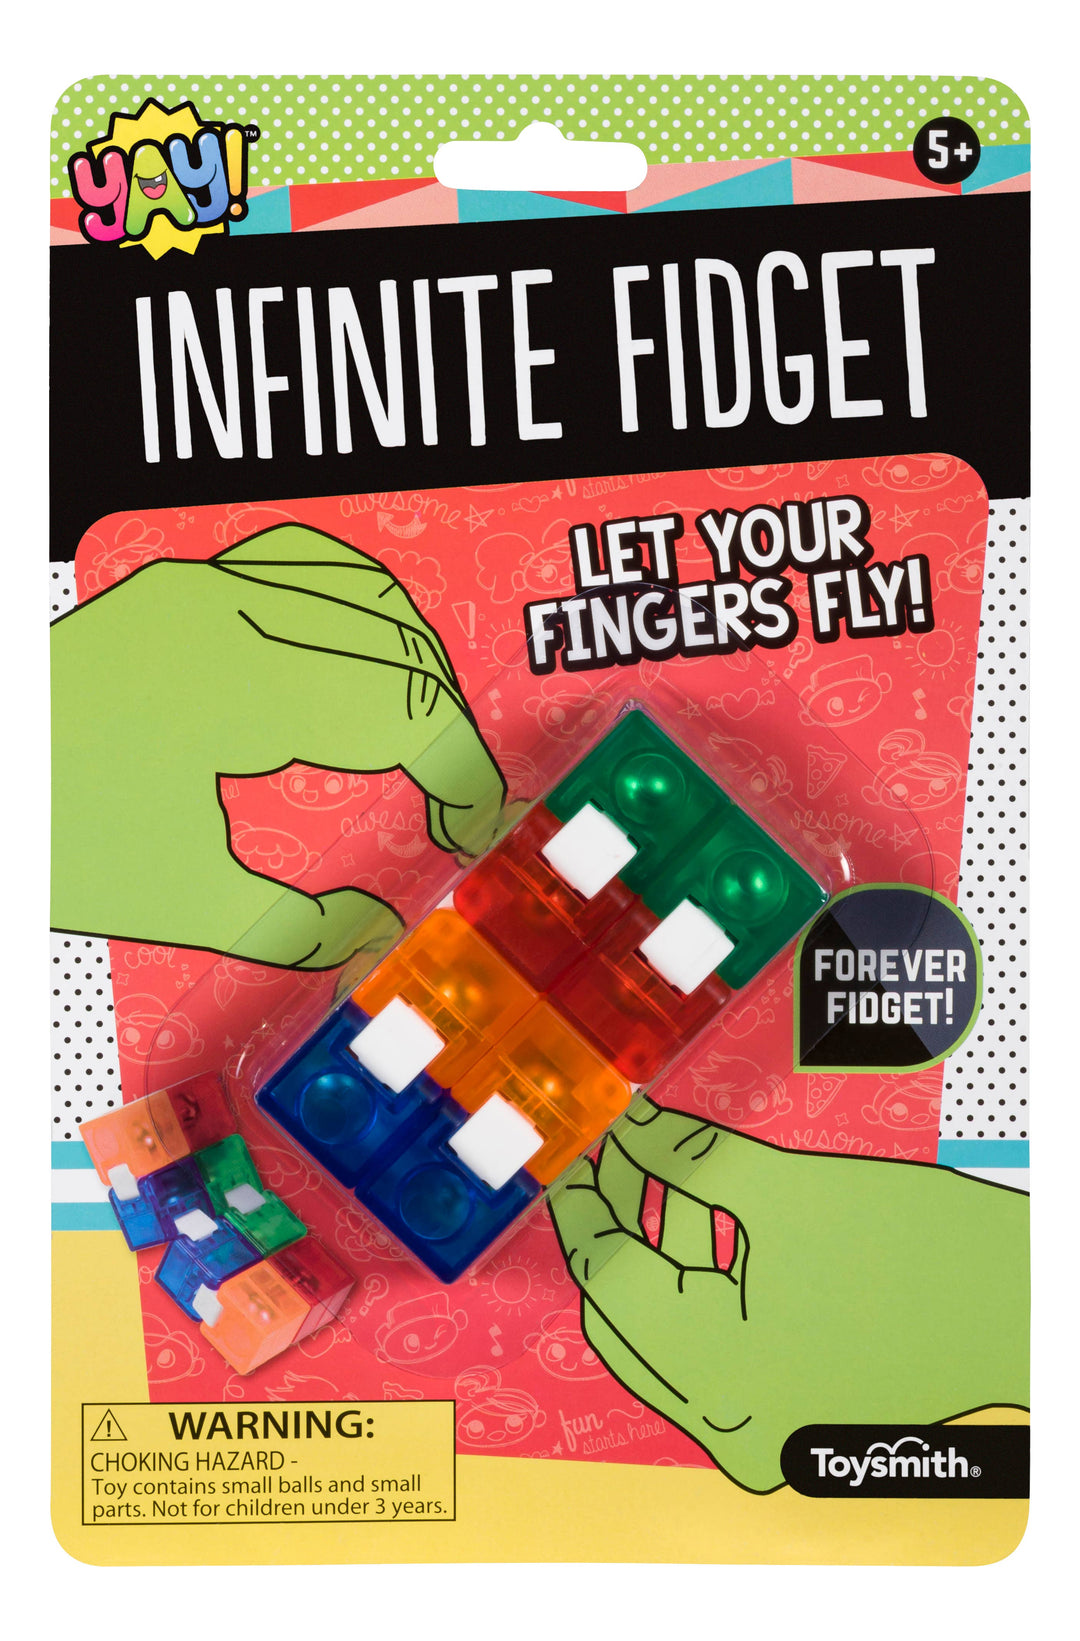 Yay! Infinite Fidget Toy, Endless Shapes-240 Kids-Inspired by Justeen-Women's Clothing Boutique in Chicago, Illinois